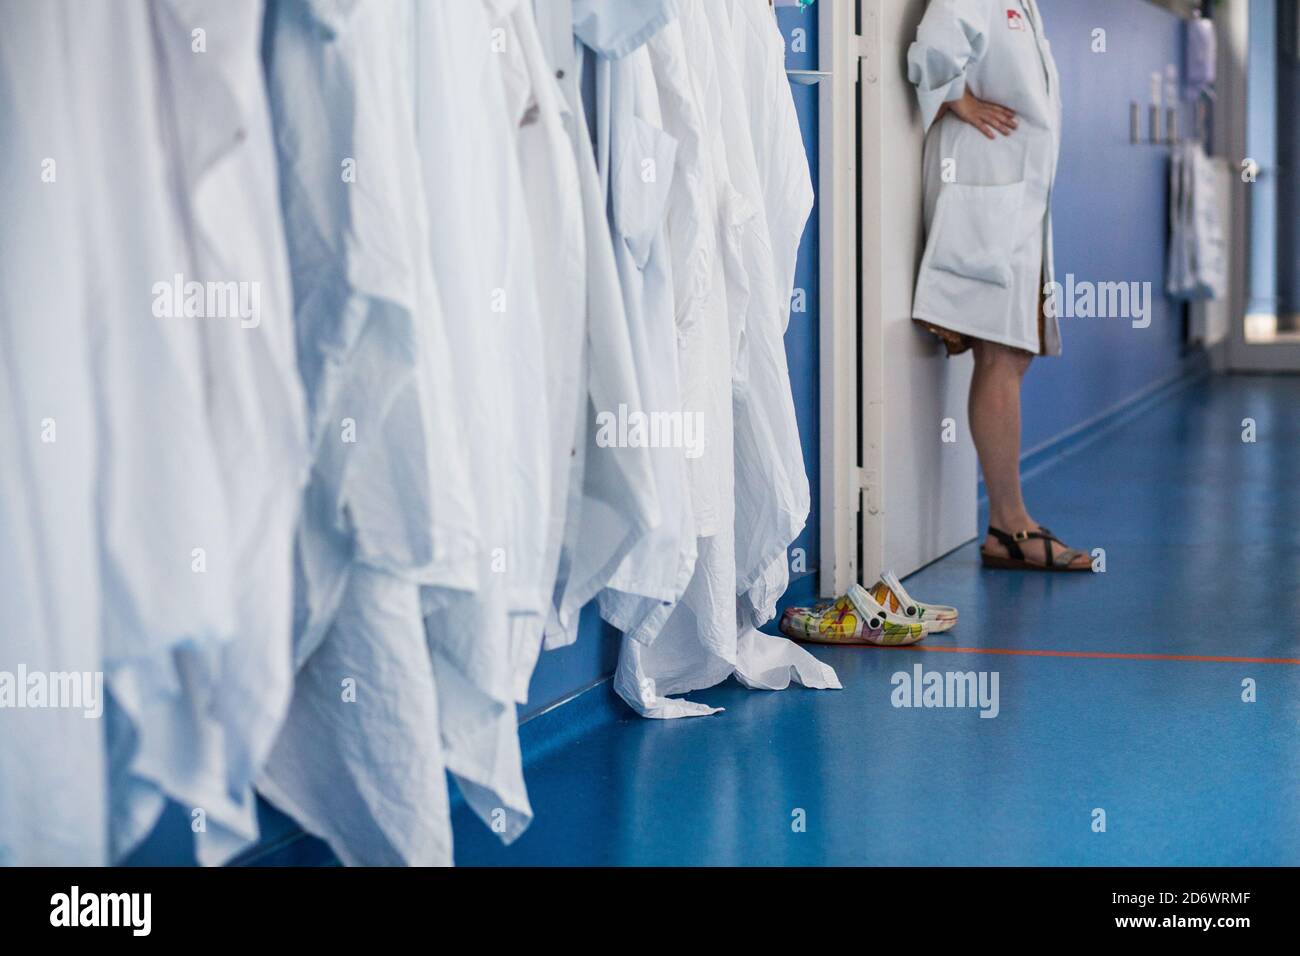 White coats in the hallway of a hospital, France. Stock Photo